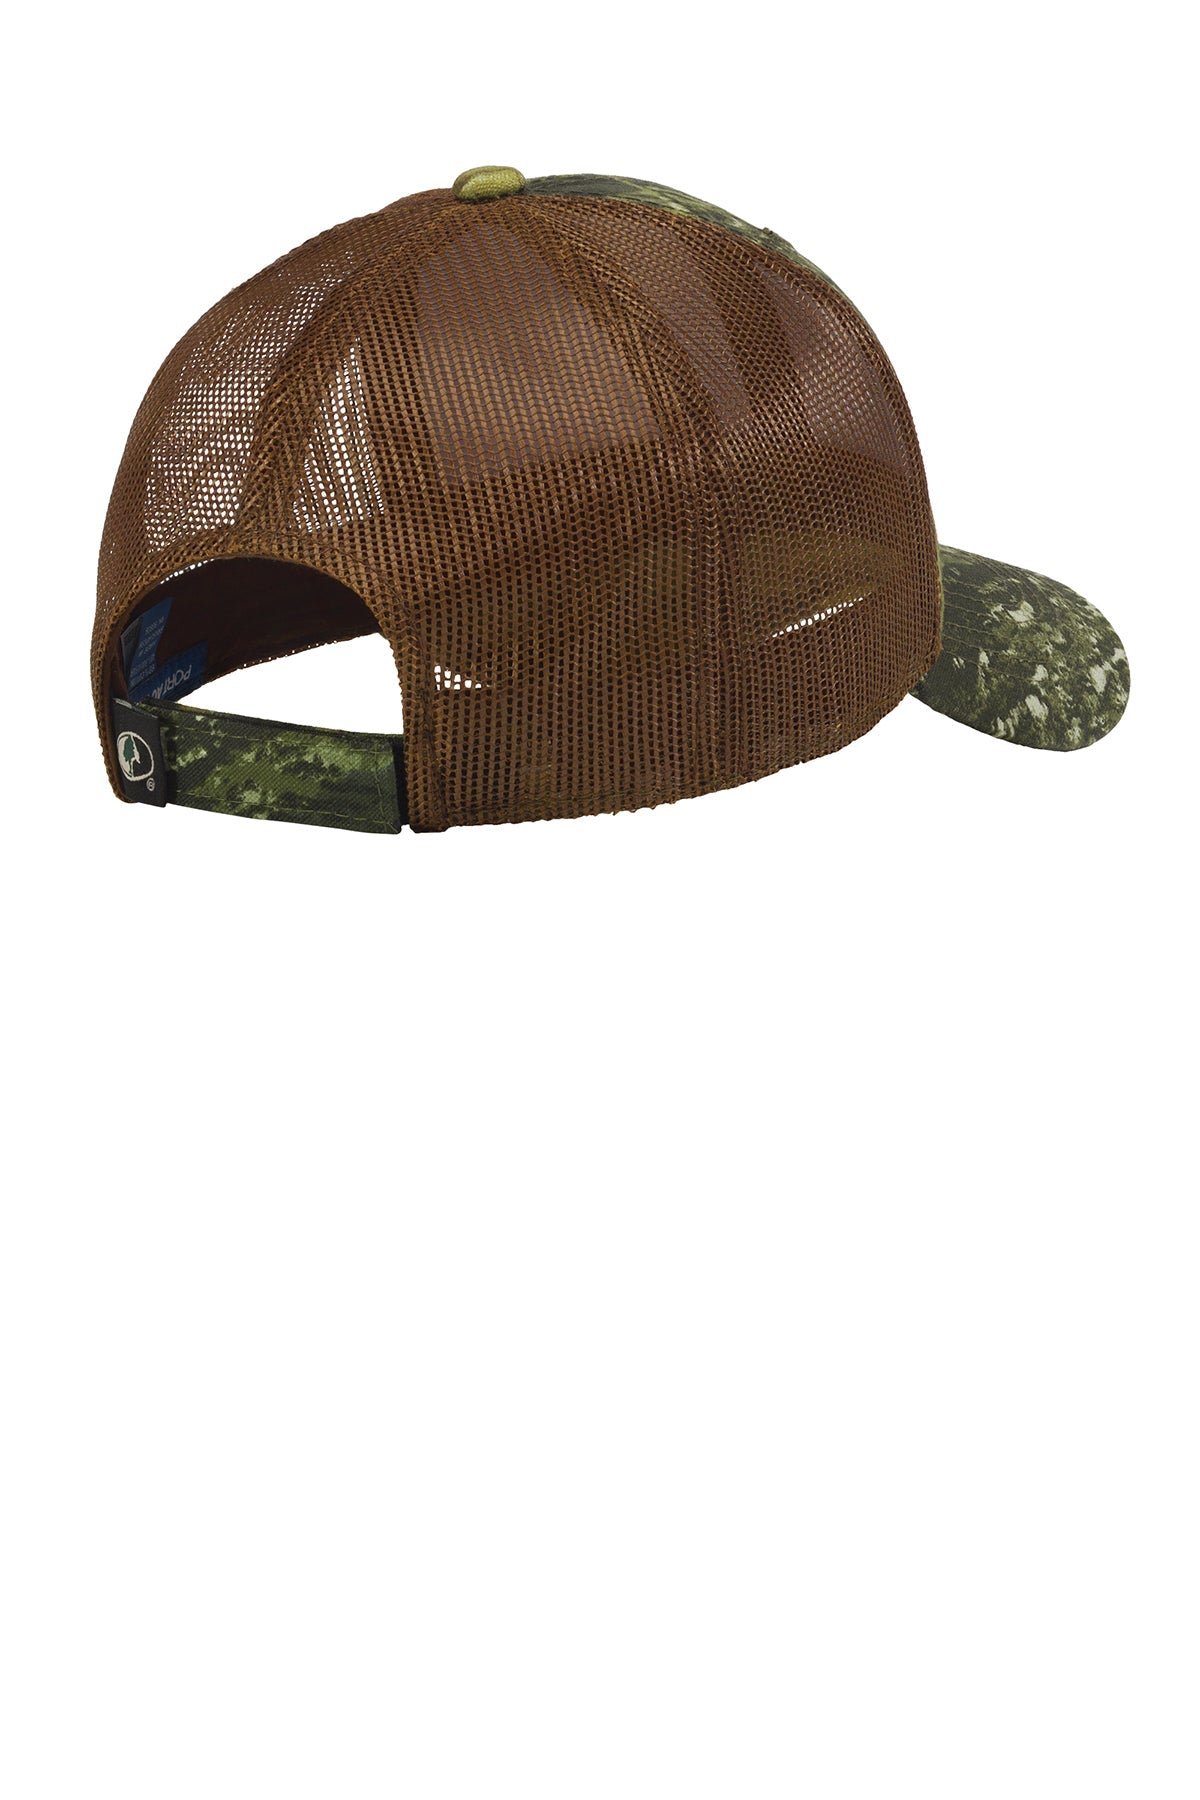 Port Authority Structured Camouflage Mesh Back Branded Caps, Mossy Oak New Break Up/ Brown